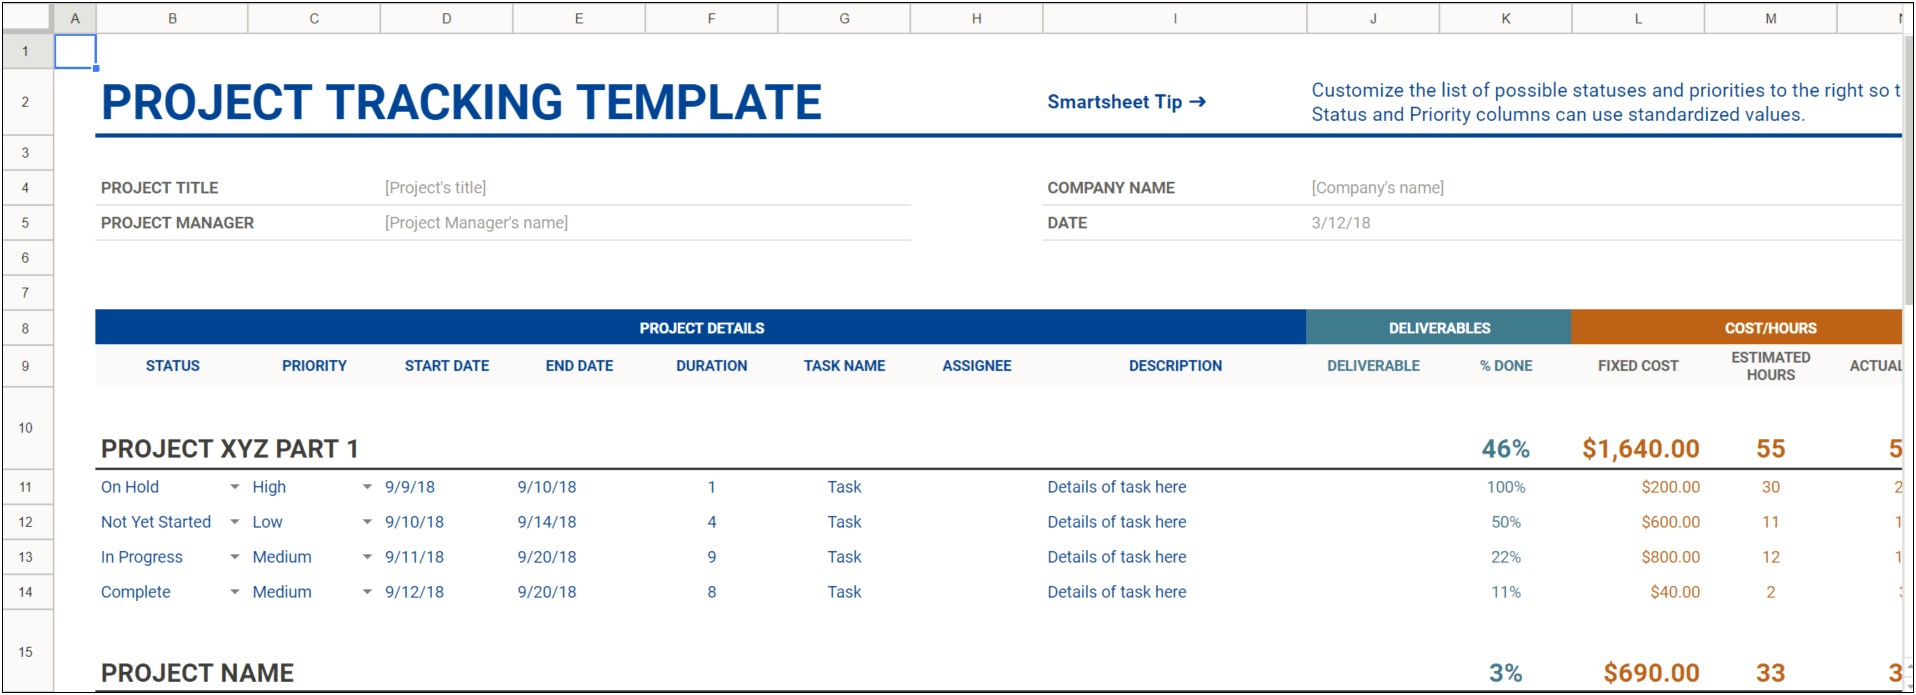 Excel Real Estate Pro Forma Template Free